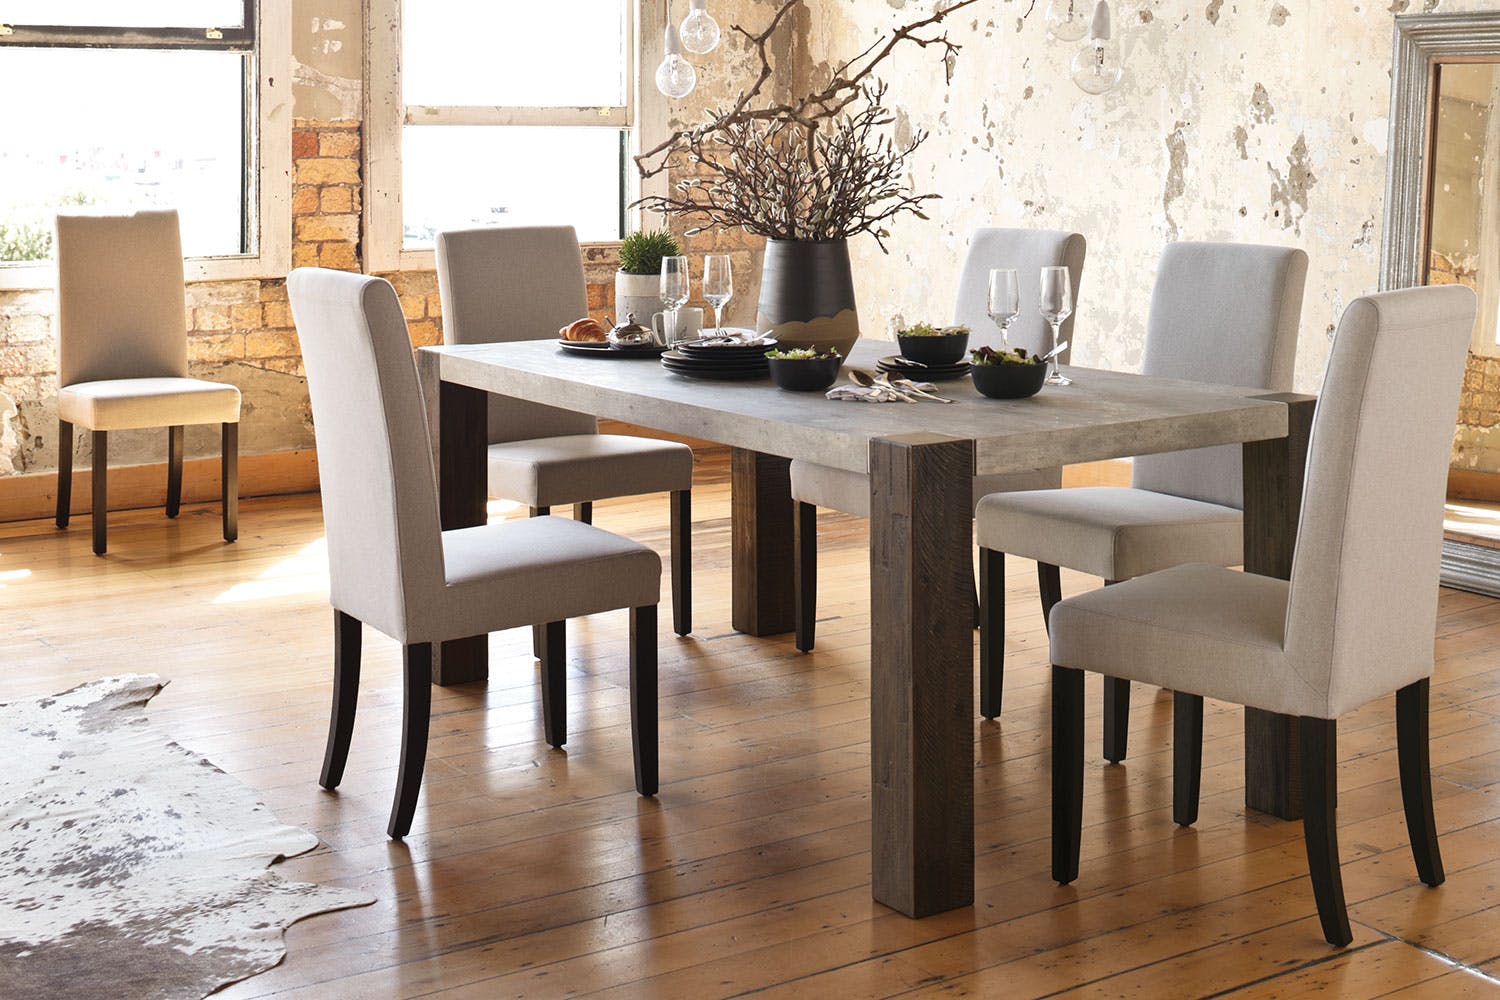 We produce high-quality dining furniture from premium materials